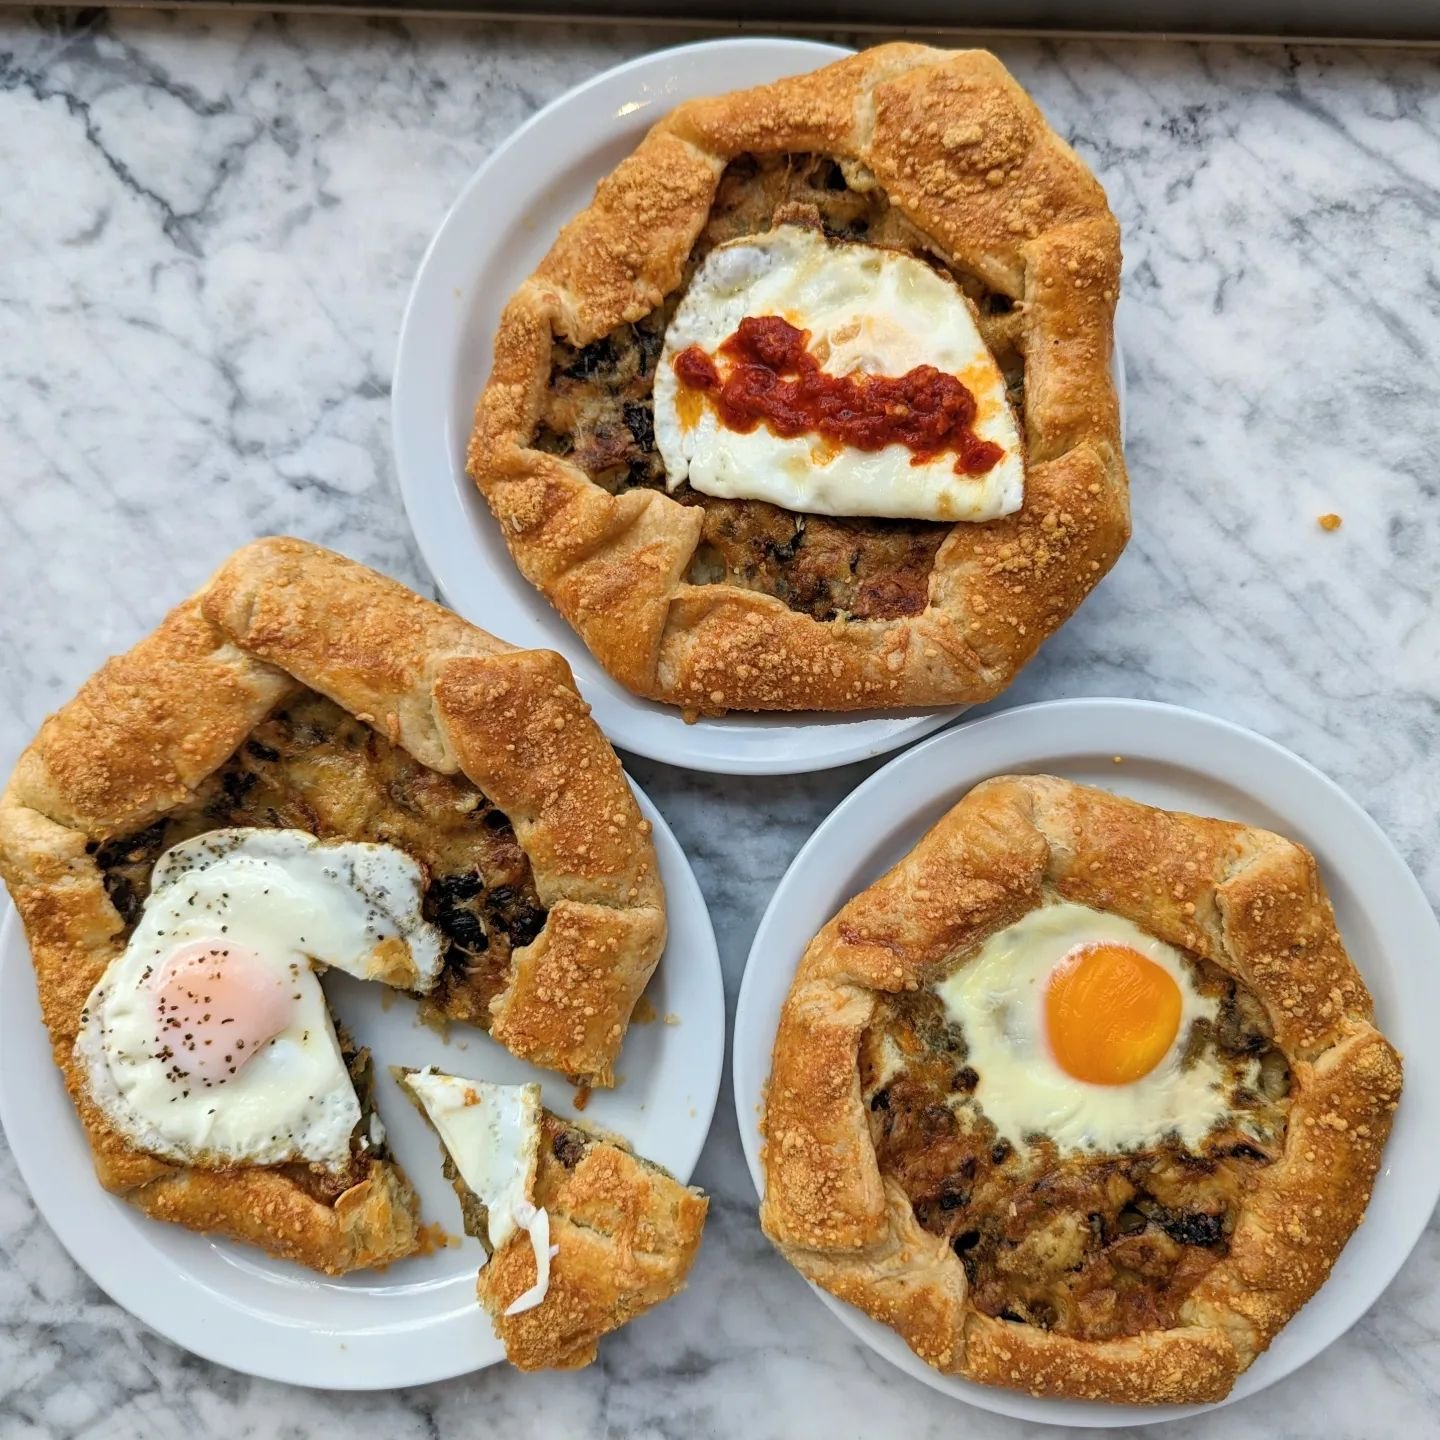 Tomorrow's Sunday brunch special is... Breakfast galette!

Wonderfully flakey pie dough filled with cheesey potatoes and ramps, topped with an egg. These are kind of large so maybe bring a friend to share it with. That way you'll have room for pastri